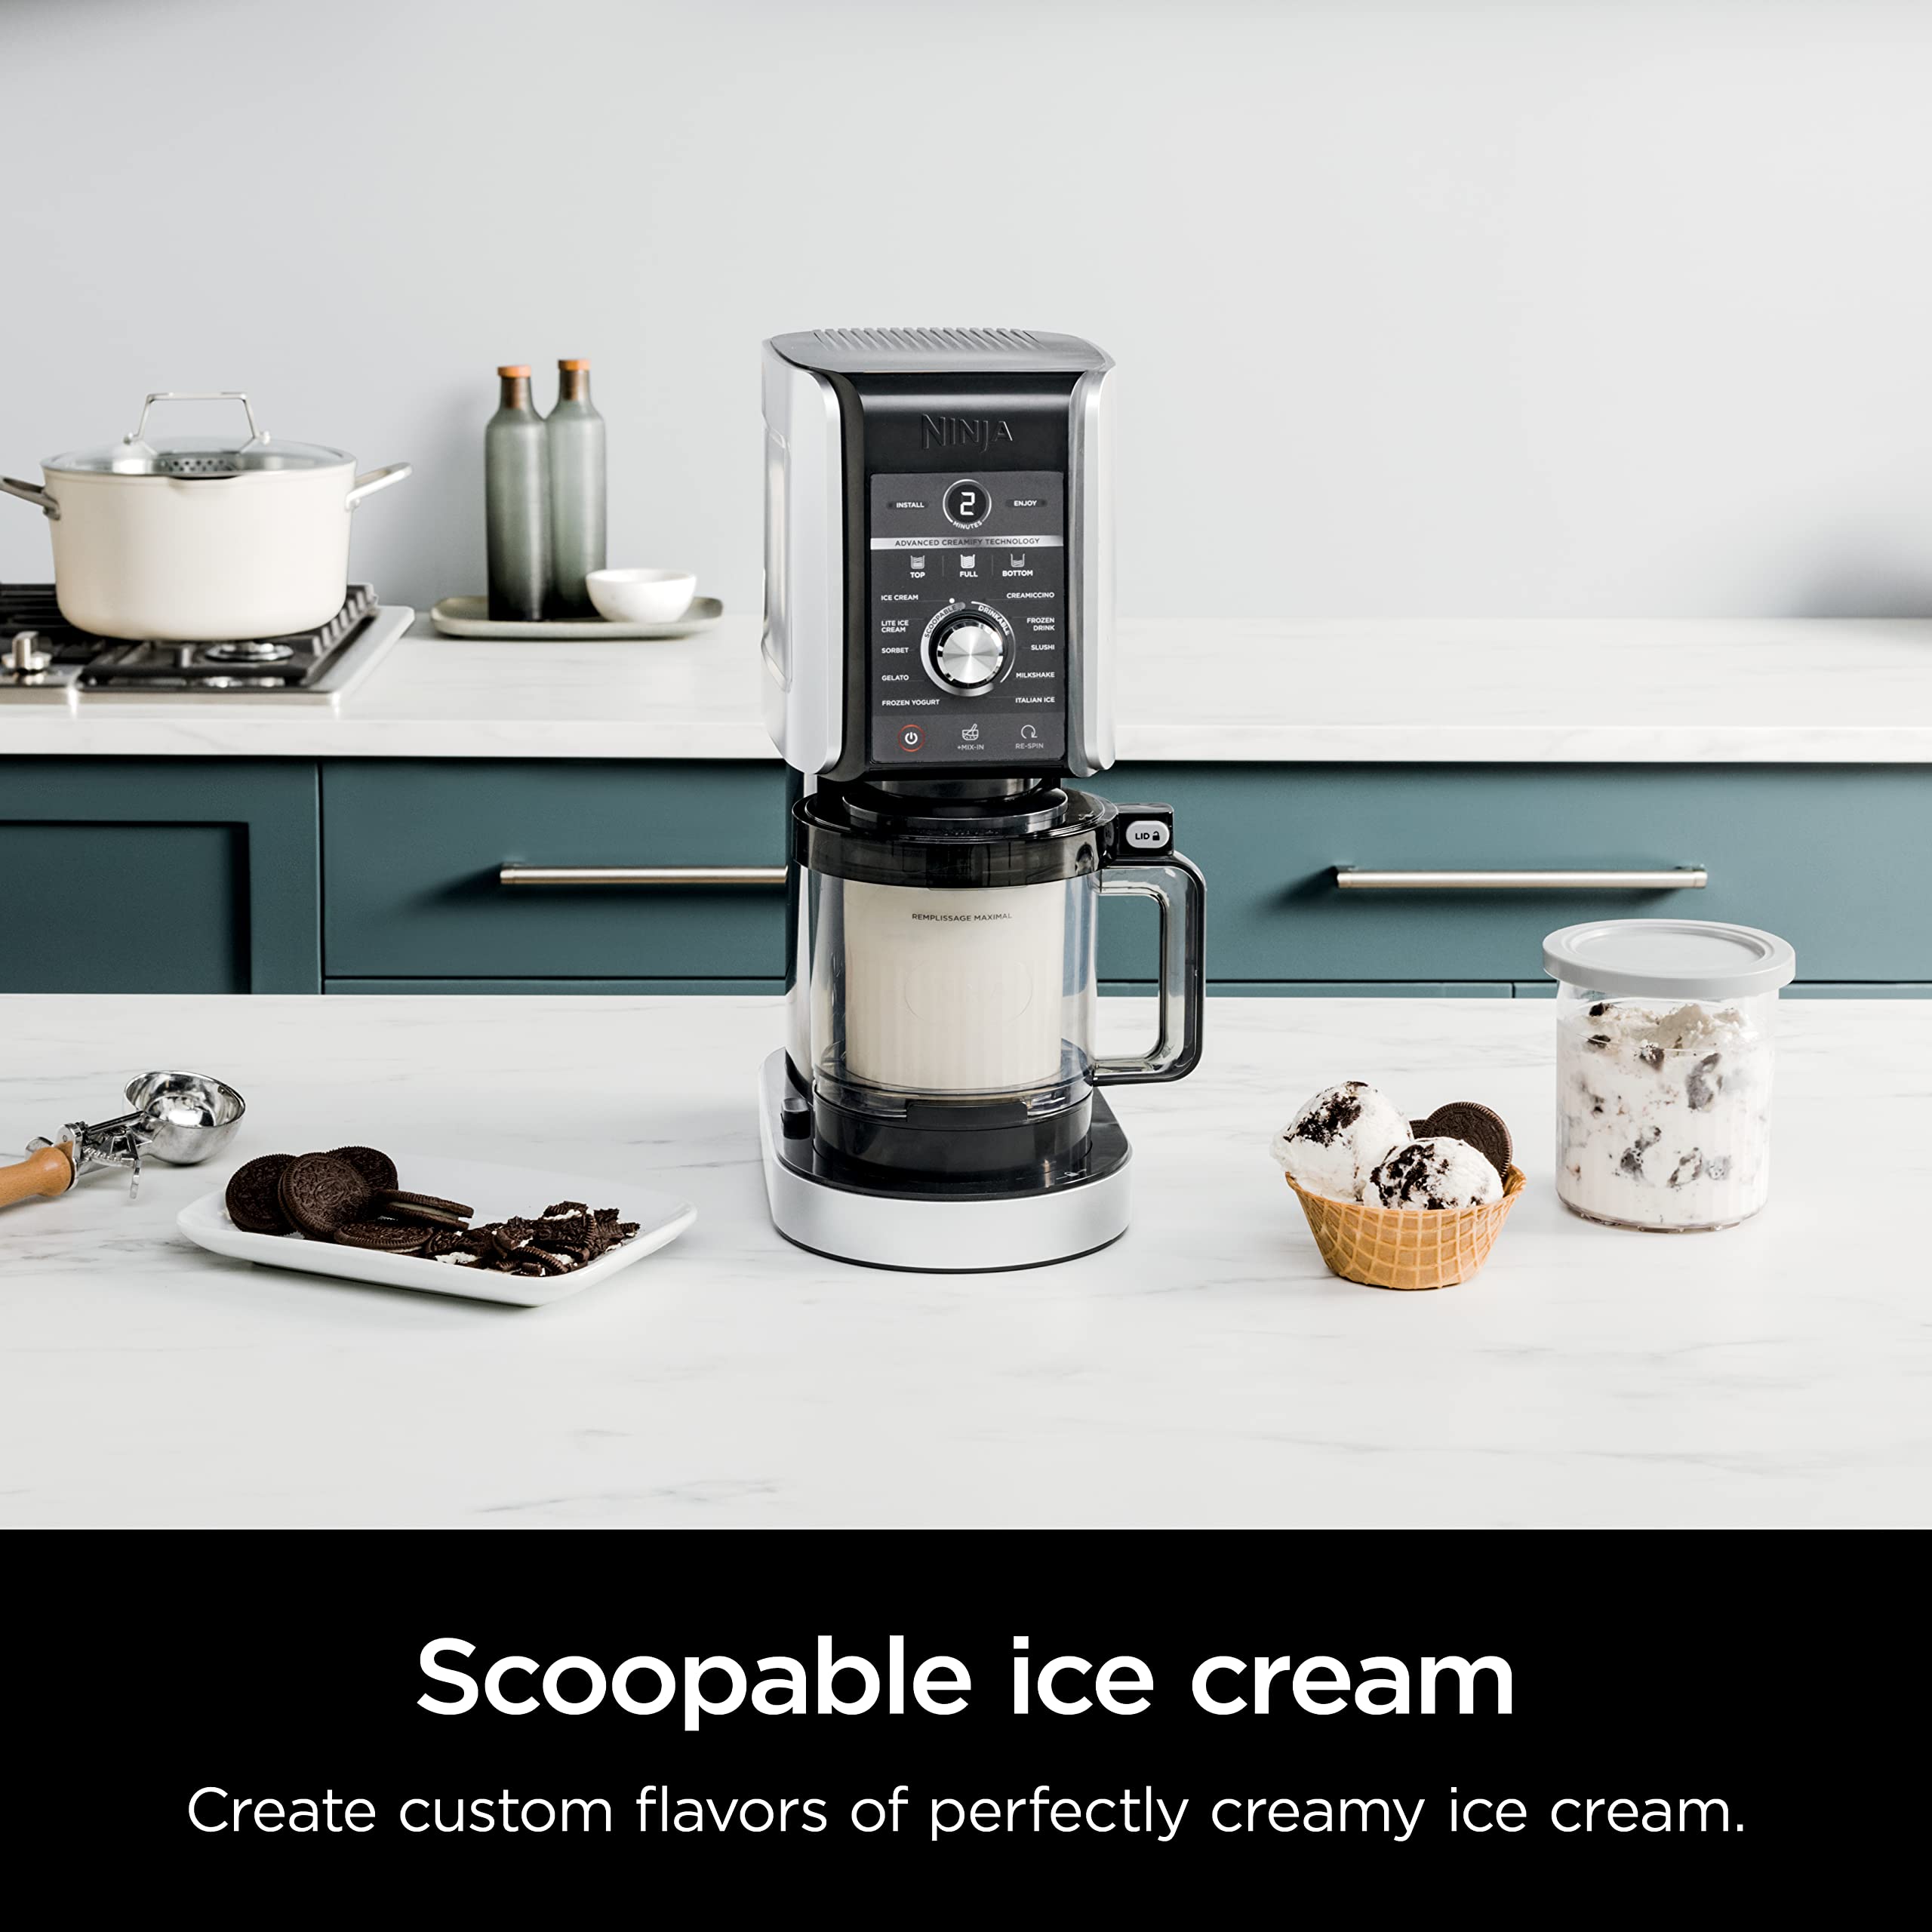 Ninja NC501 CREAMi Deluxe 11-in-1 Ice Cream & Frozen Treat Maker for Ice Cream, Sorbet, Milkshakes, Frozen Drinks & More, 11 Programs, with 2 XL Family Size Pint Containers, Perfect for Kids (Renewed) (Silver)